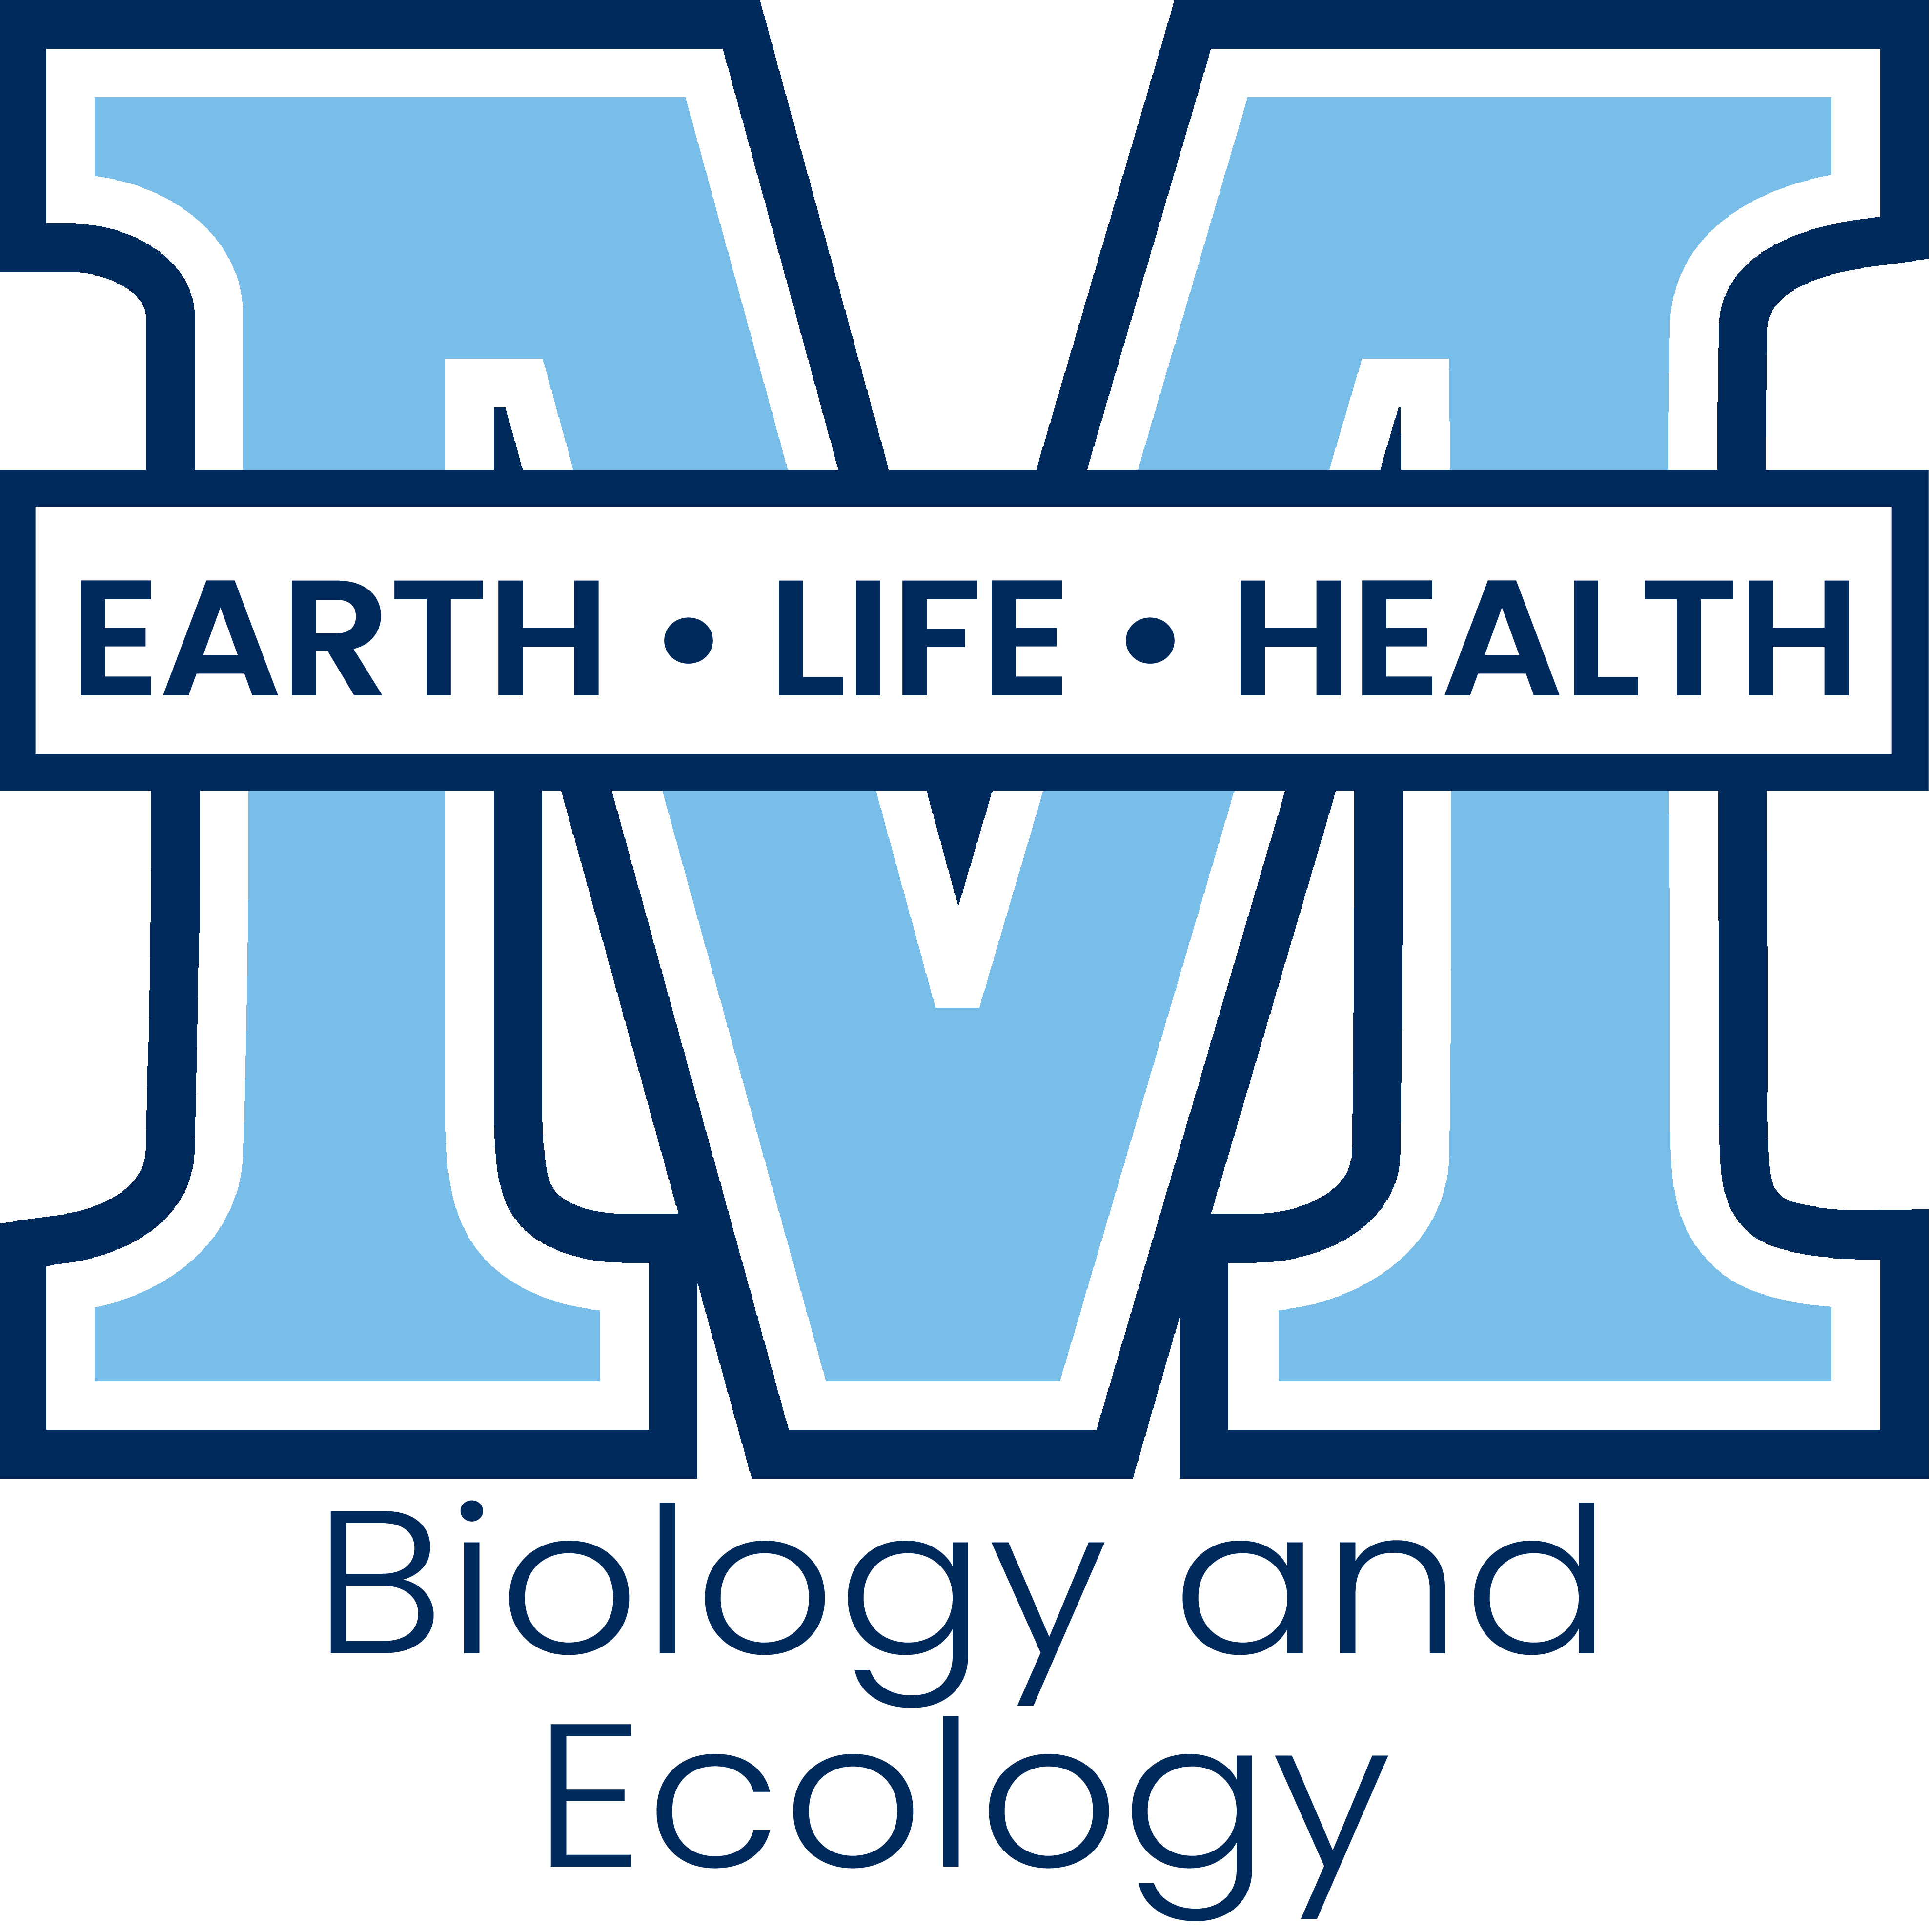 College M logo with biology and ecology